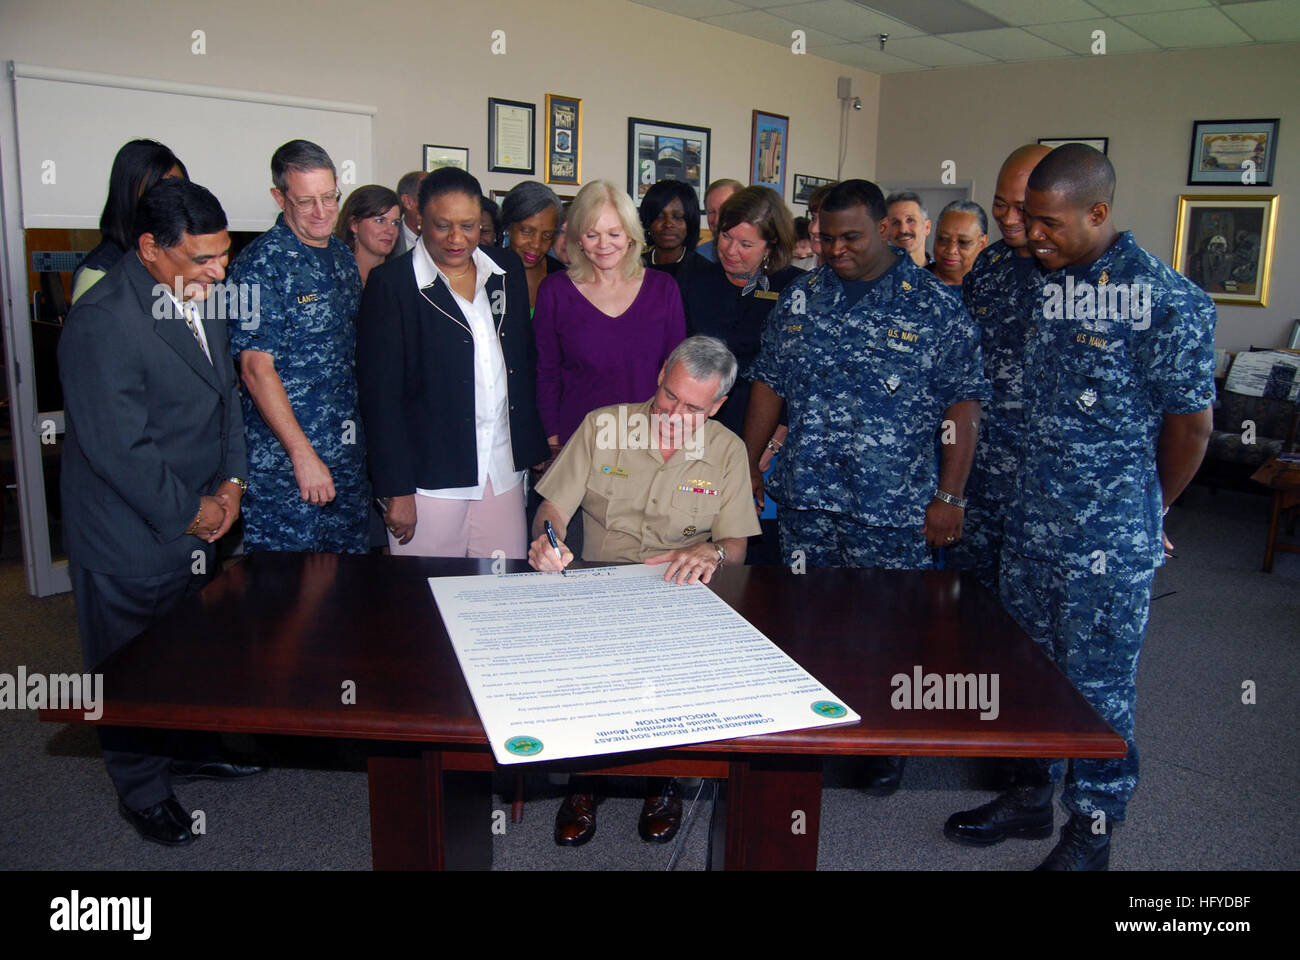 100908-N-5165S-007   JACKSONVILLE, Fla. (Sept. 8, 2010) Rear Adm. Tim Alexander, commander of Navy Region Southeast, signs a proclamation making September Suicide Prevention Month during a ceremony in the commander's office. Looking on are members of the Navy Region Southeast and installation staffs. (U.S. Navy photo by Twilla Smith/Released) US Navy 100908-N-5165S-007 Rear Adm. Tim Alexander, commander of Navy Region Southeast, signs a proclamation making September Suicide Prevention Mo Stock Photo